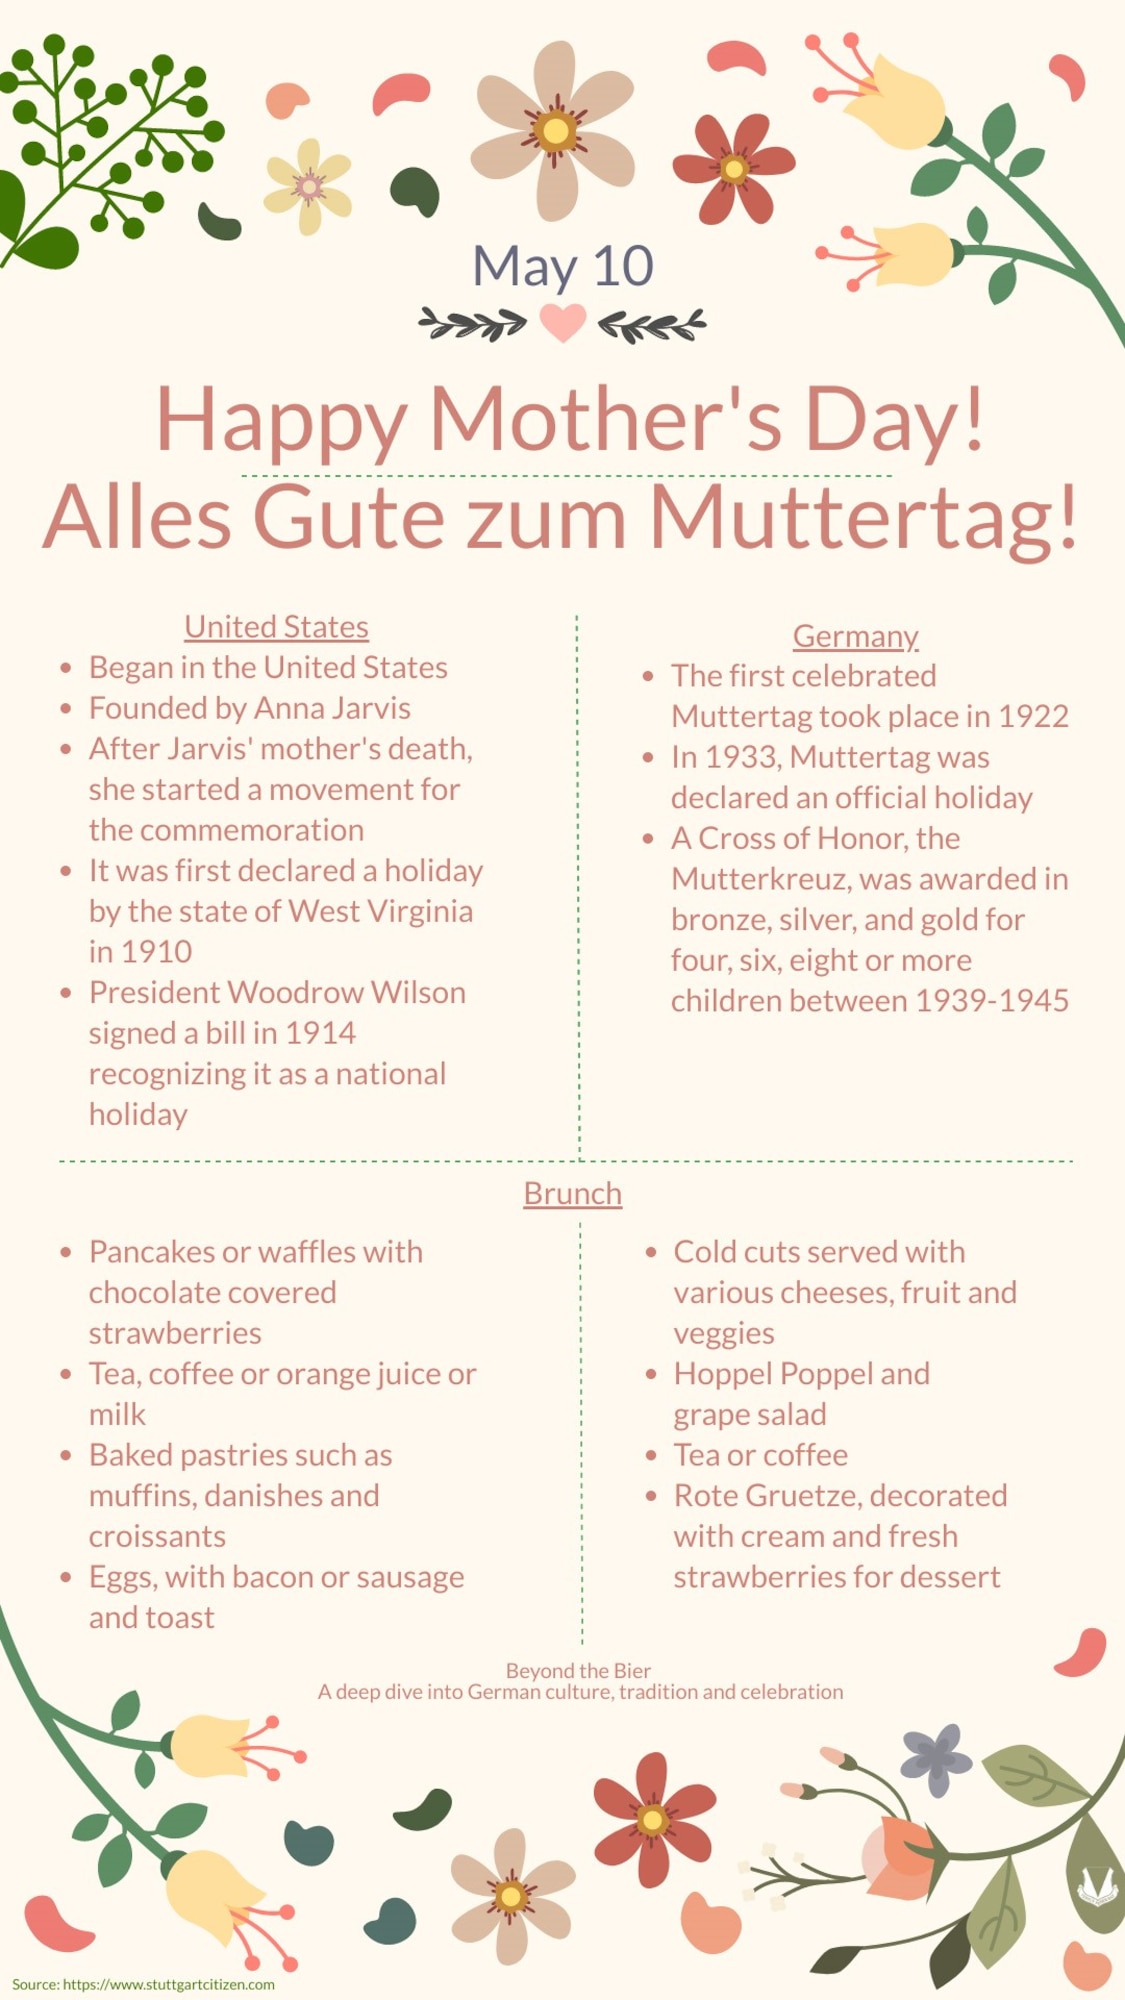 "Muttertag" translates to "Mother's Day." Graphic designed to promote the continuation of Ramstein Air Base's Beyond the Bier series. Beyond the Bier is a cultural series based on German customs, traditions and history in the Kaiserslautern Military Community, designed to let people get to know why our neighbors celebrate, and commemorate certain holidays and observances. (U.S. Air Force illustration by Tech. Sgt. J. Smith)